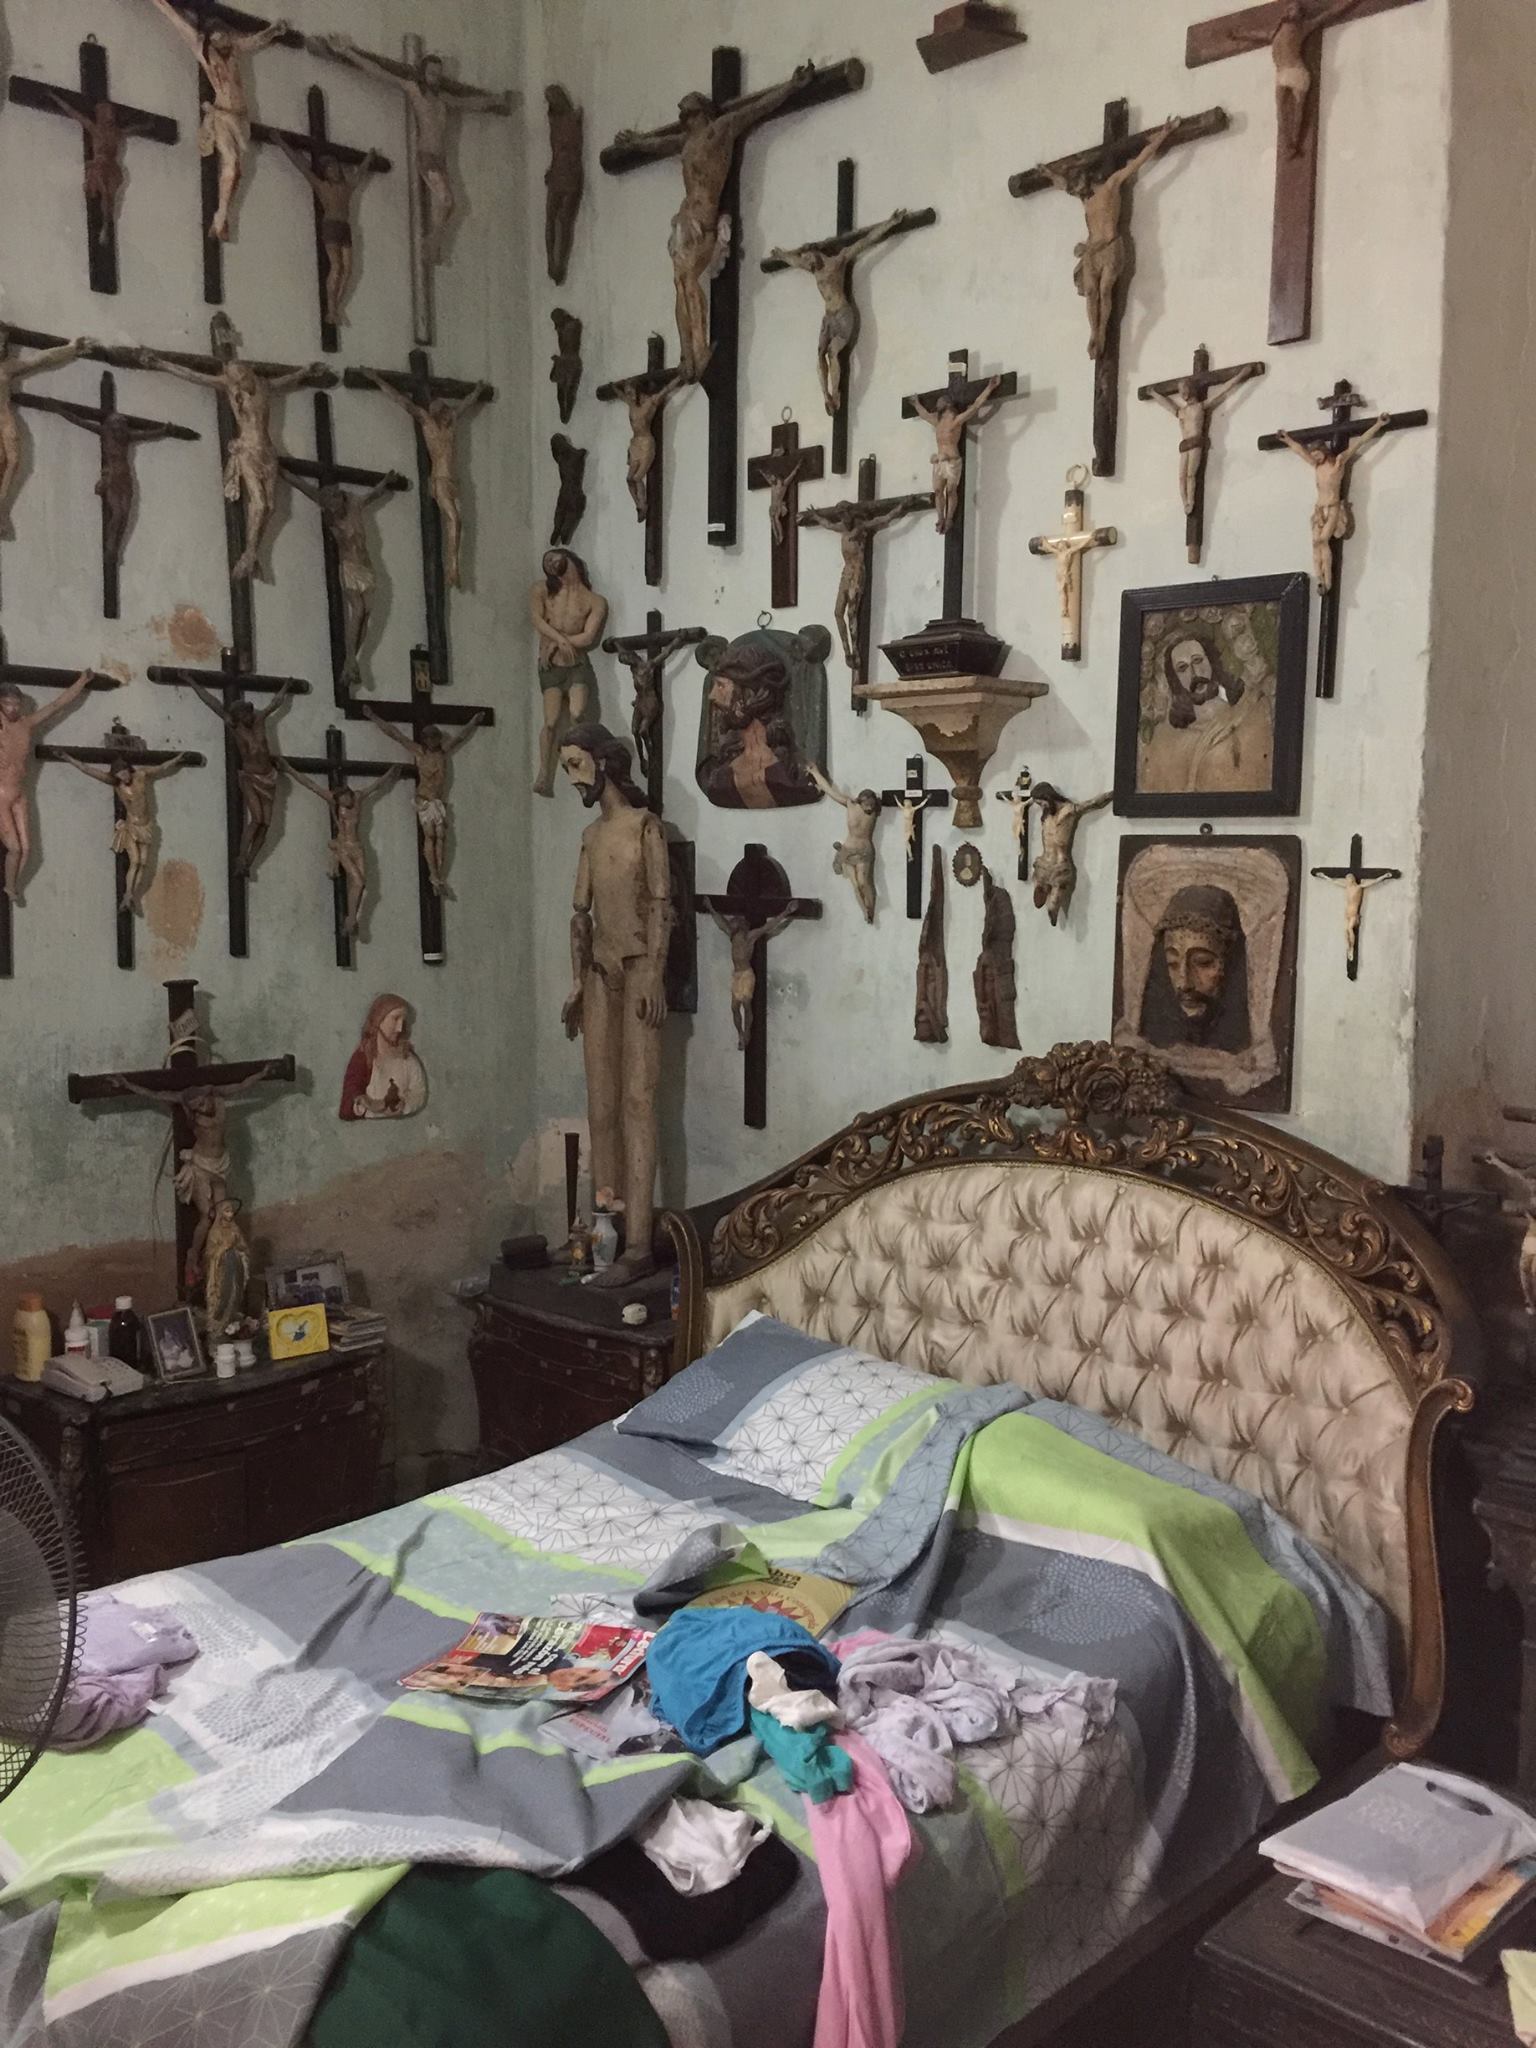   Well, I would never sleep in this bed. Throughout Cuba, many collect important historical items or religious ones. We tried to connect with a doctor, who unfortunately is such an alcoholic that he was always out drinking and never made it home for 